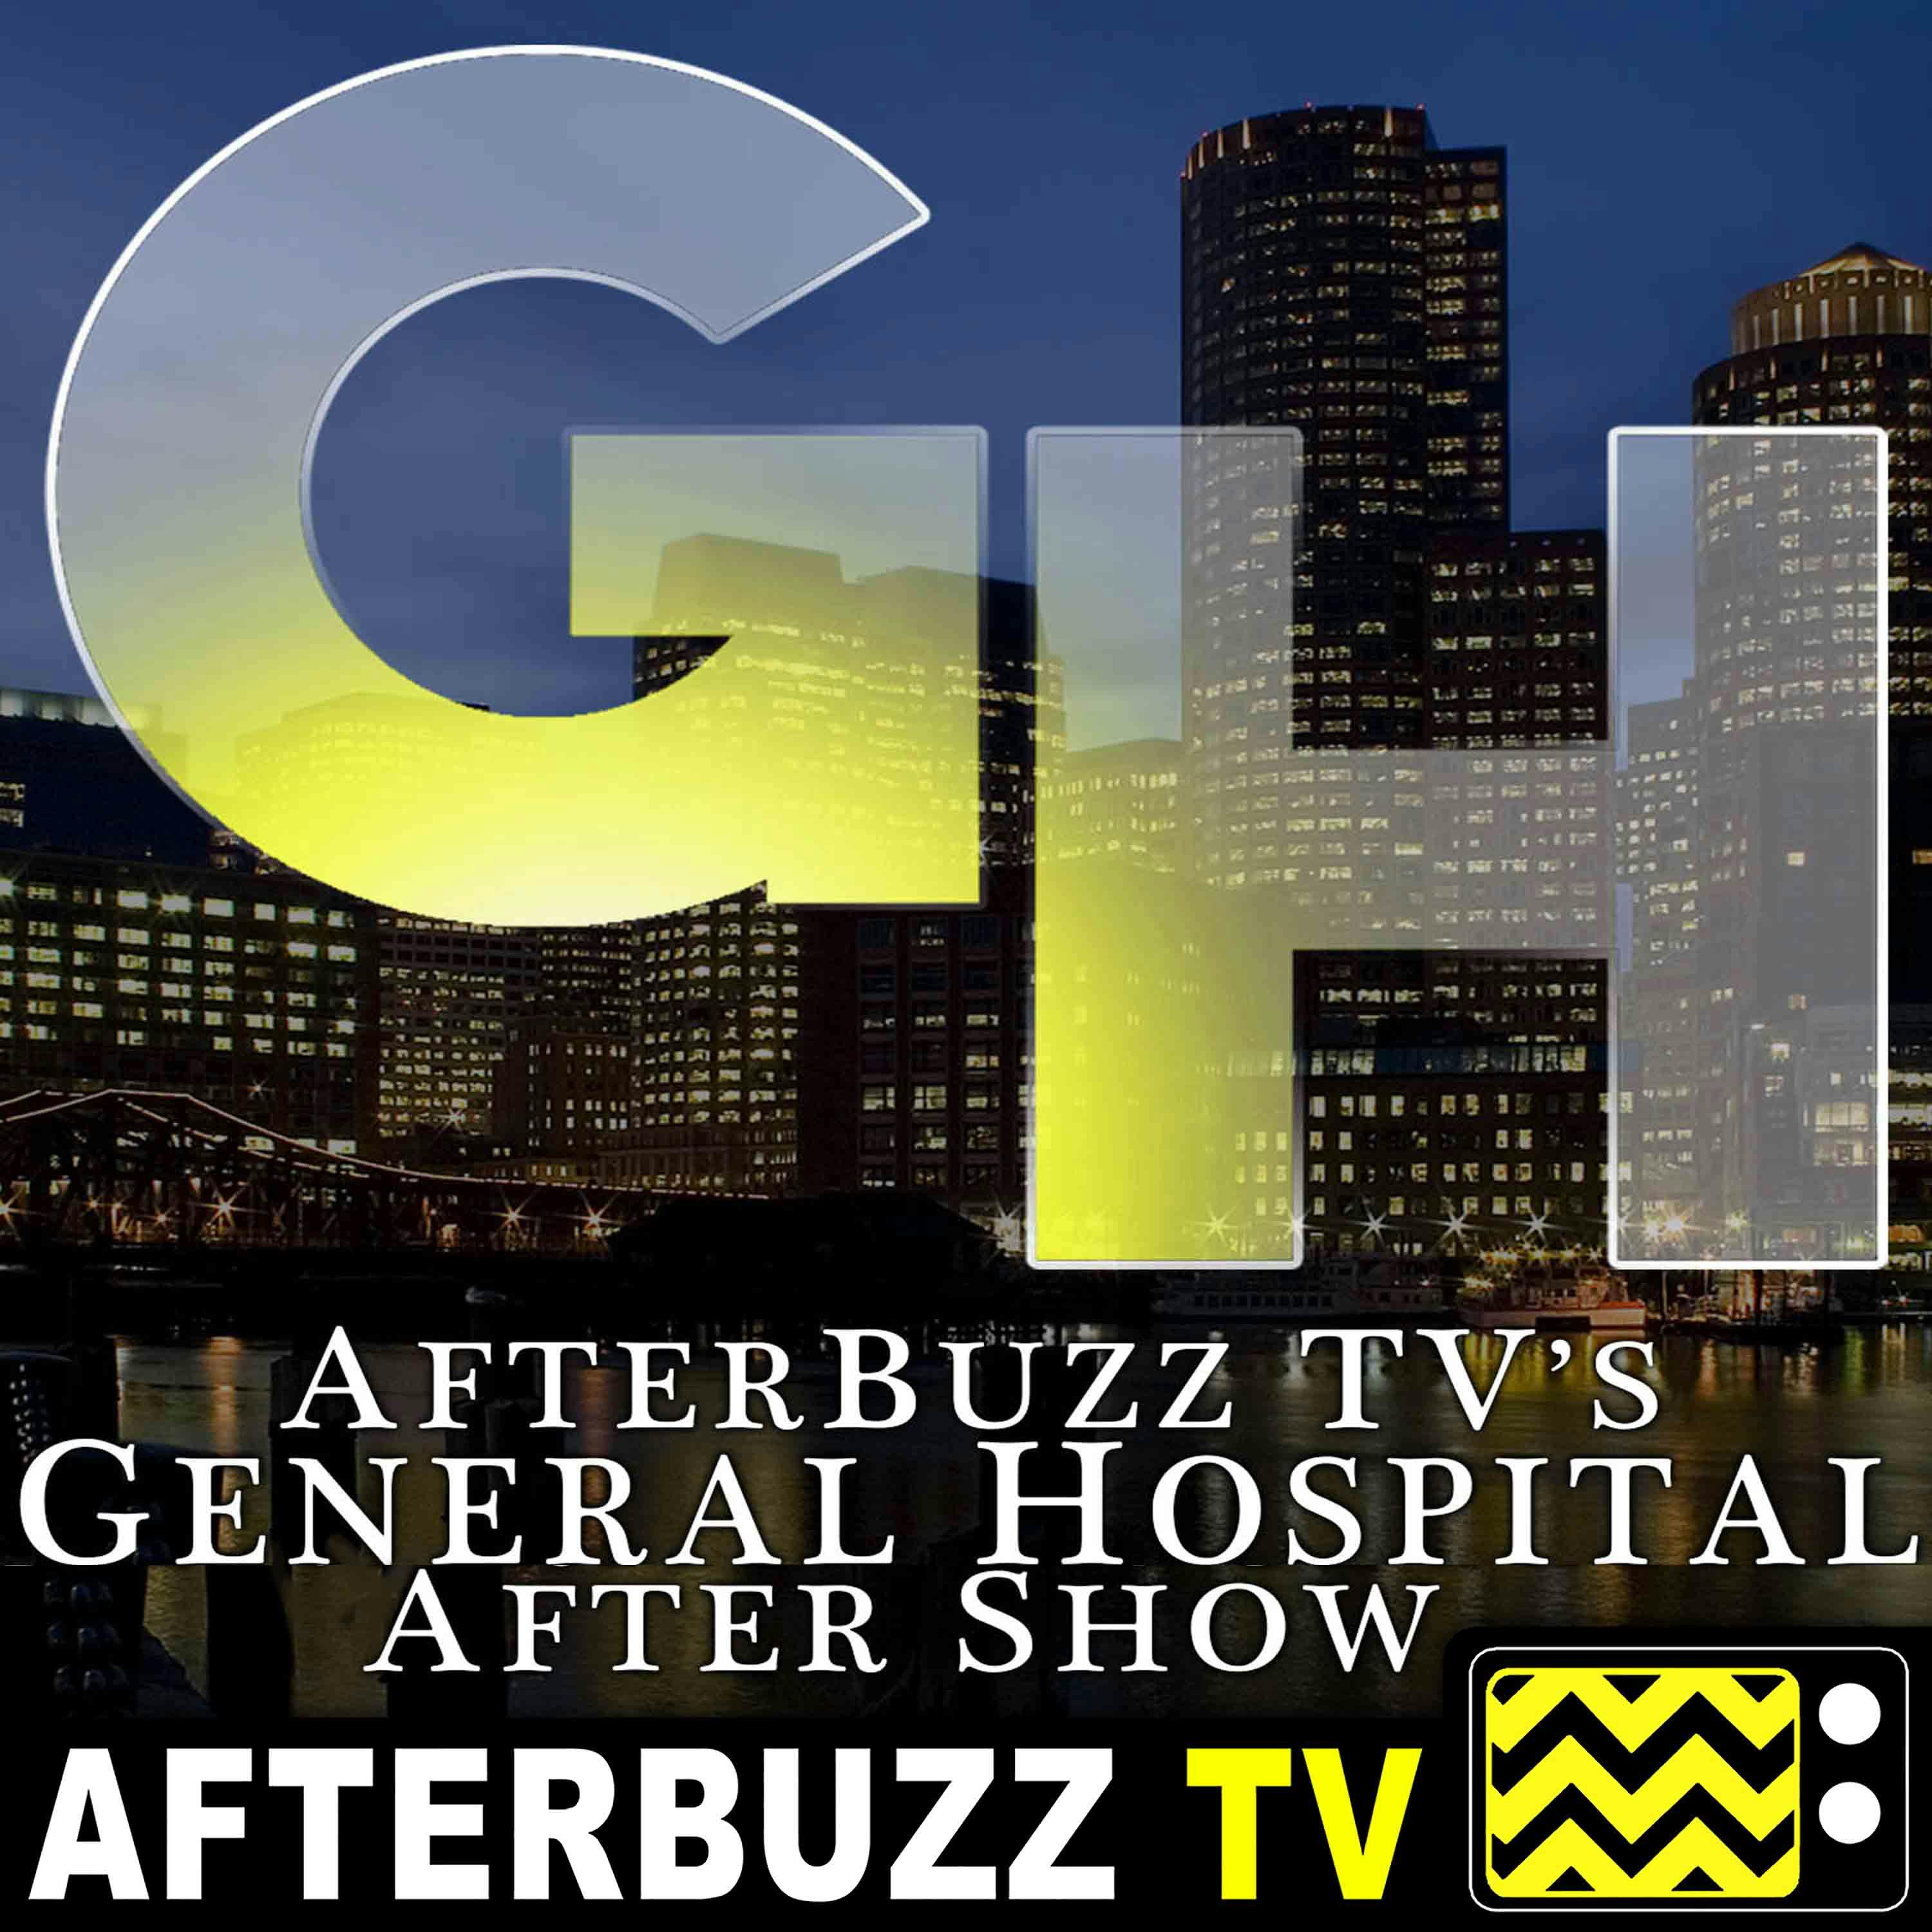 Review Of General Hospital for December 31st - January 4th, 2019